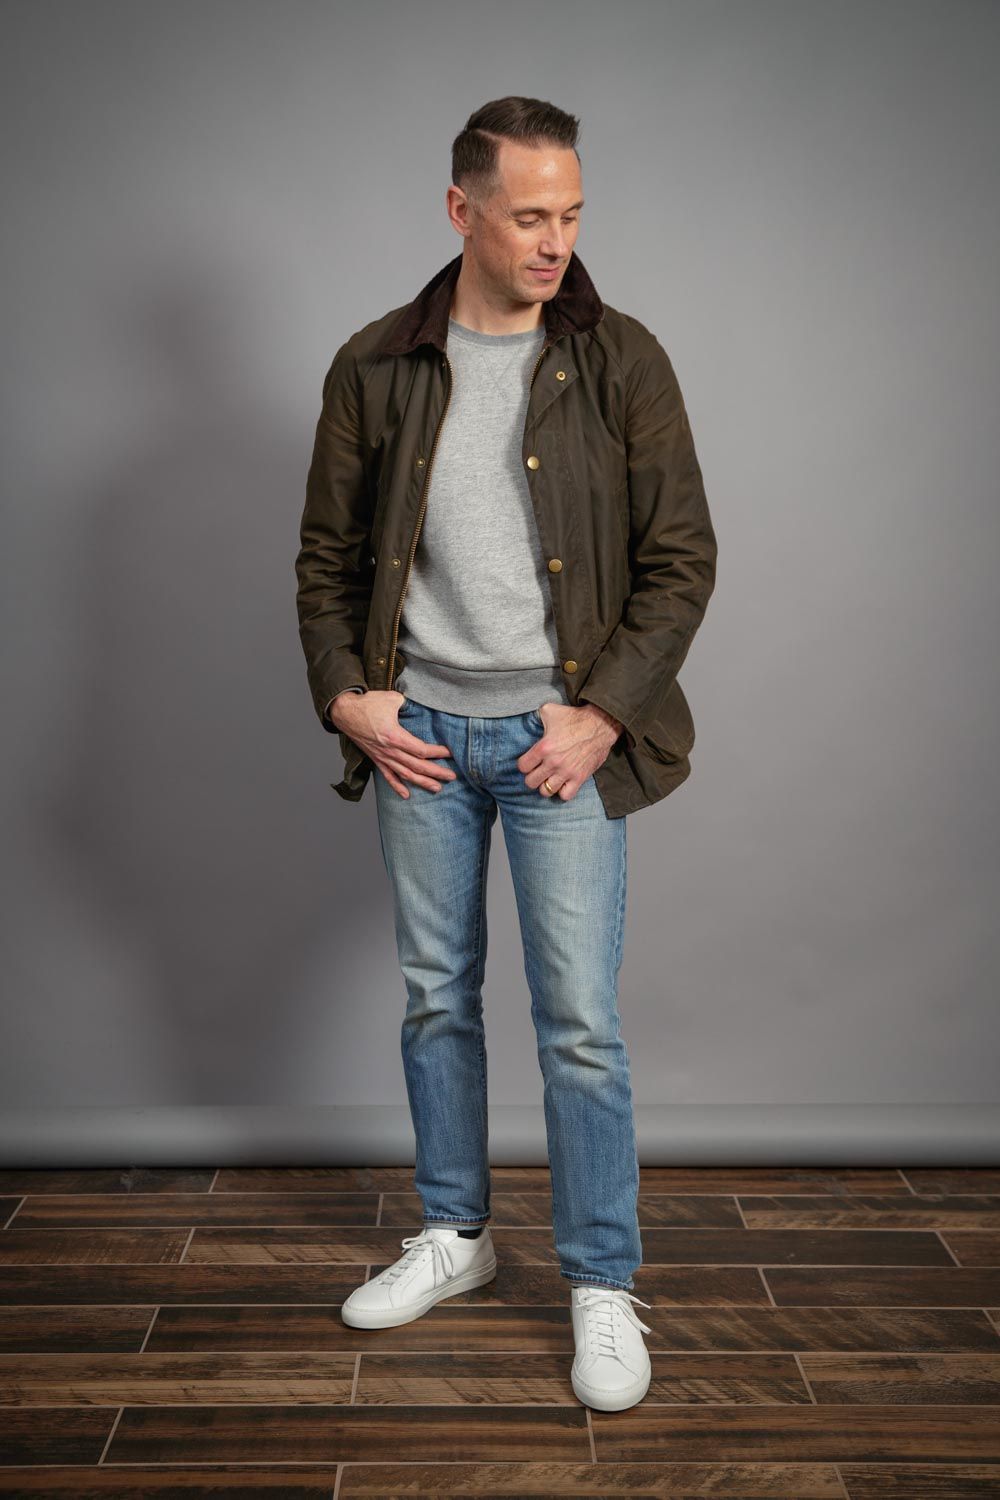 Barbour-waxed-jacket-for-men-heather-grey-casual-sweatshirt-light-wash-jeans-common-projects-sneakers